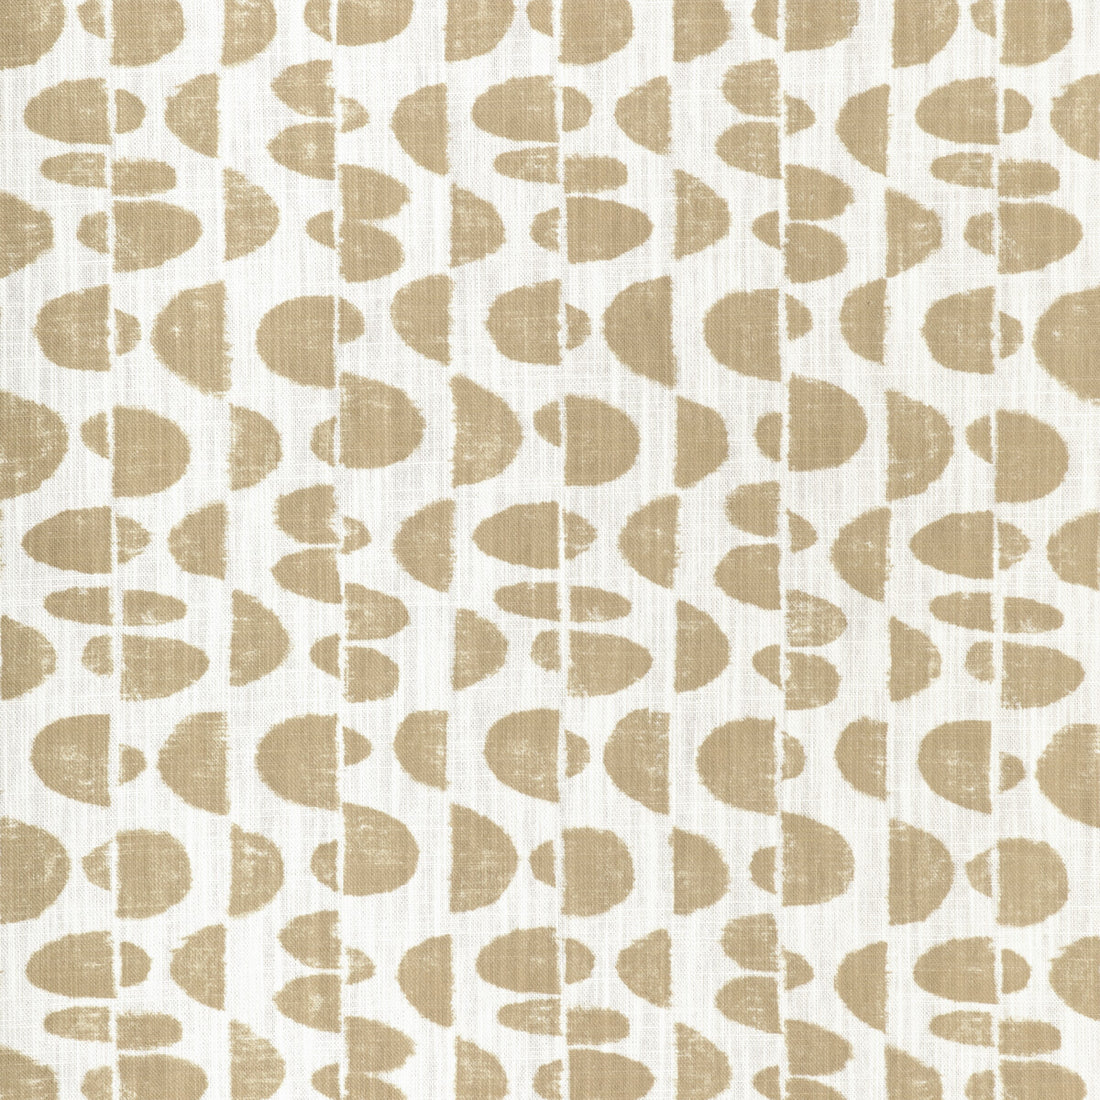 Moon Phase fabric in tan color - pattern MOON PHASE.161.0 - by Kravet Basics in the Small Scale Prints collection